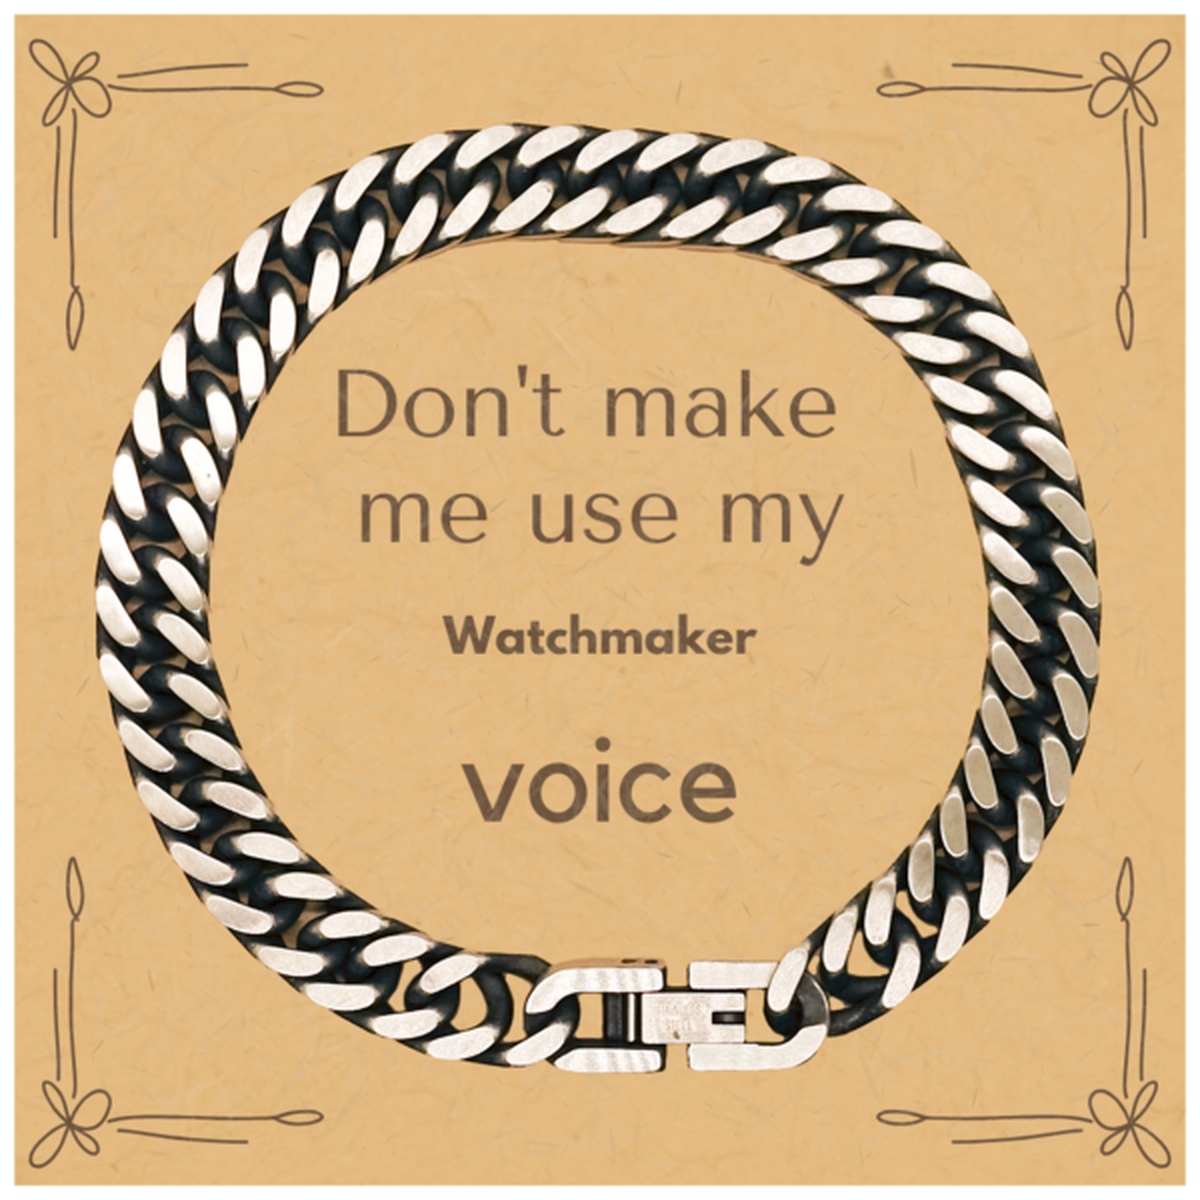 Don't make me use my Watchmaker voice, Sarcasm Watchmaker Card Gifts, Christmas Watchmaker Cuban Link Chain Bracelet Birthday Unique Gifts For Watchmaker Coworkers, Men, Women, Colleague, Friends